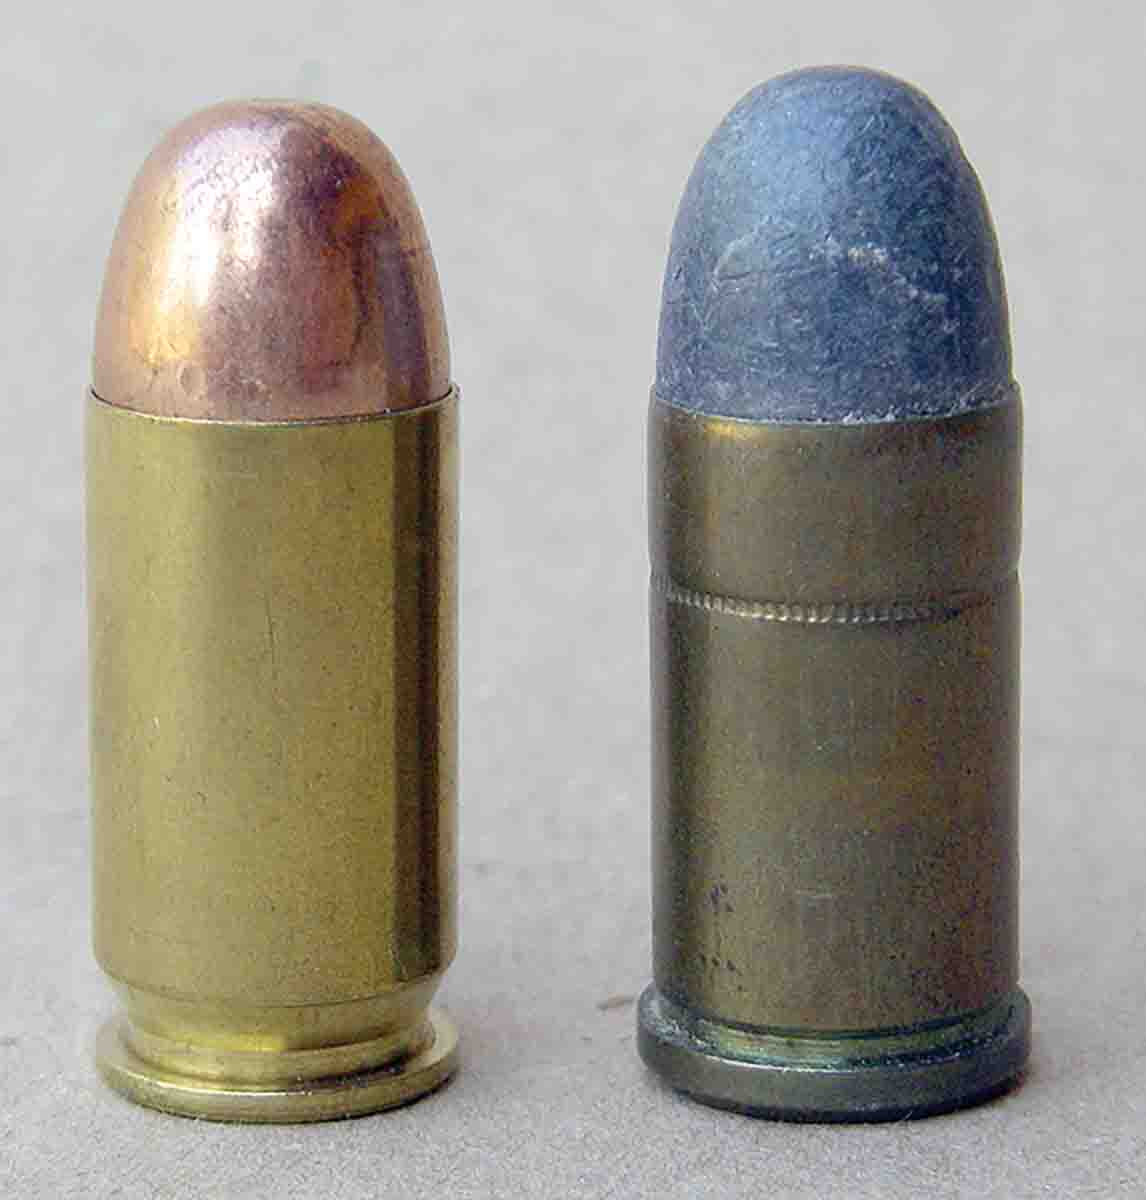 The .45 ACP (left) is rimless and fails to eject from revolvers, whereas the .45 Auto Rim (right) features a generous rim to facilitate ejection.